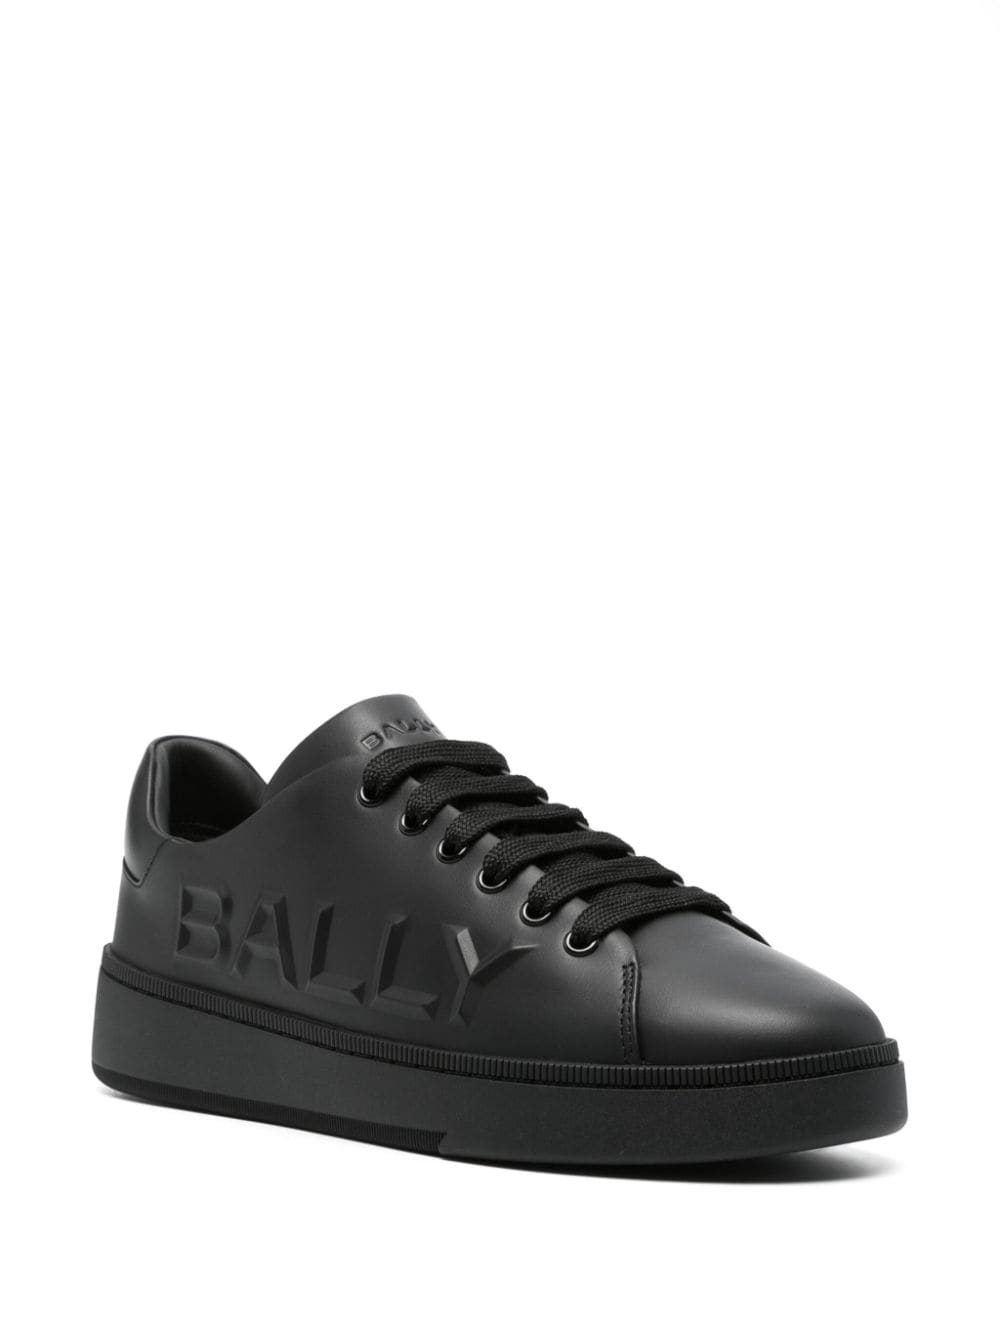 Image 2 of Bally logo-embossed leather sneakers